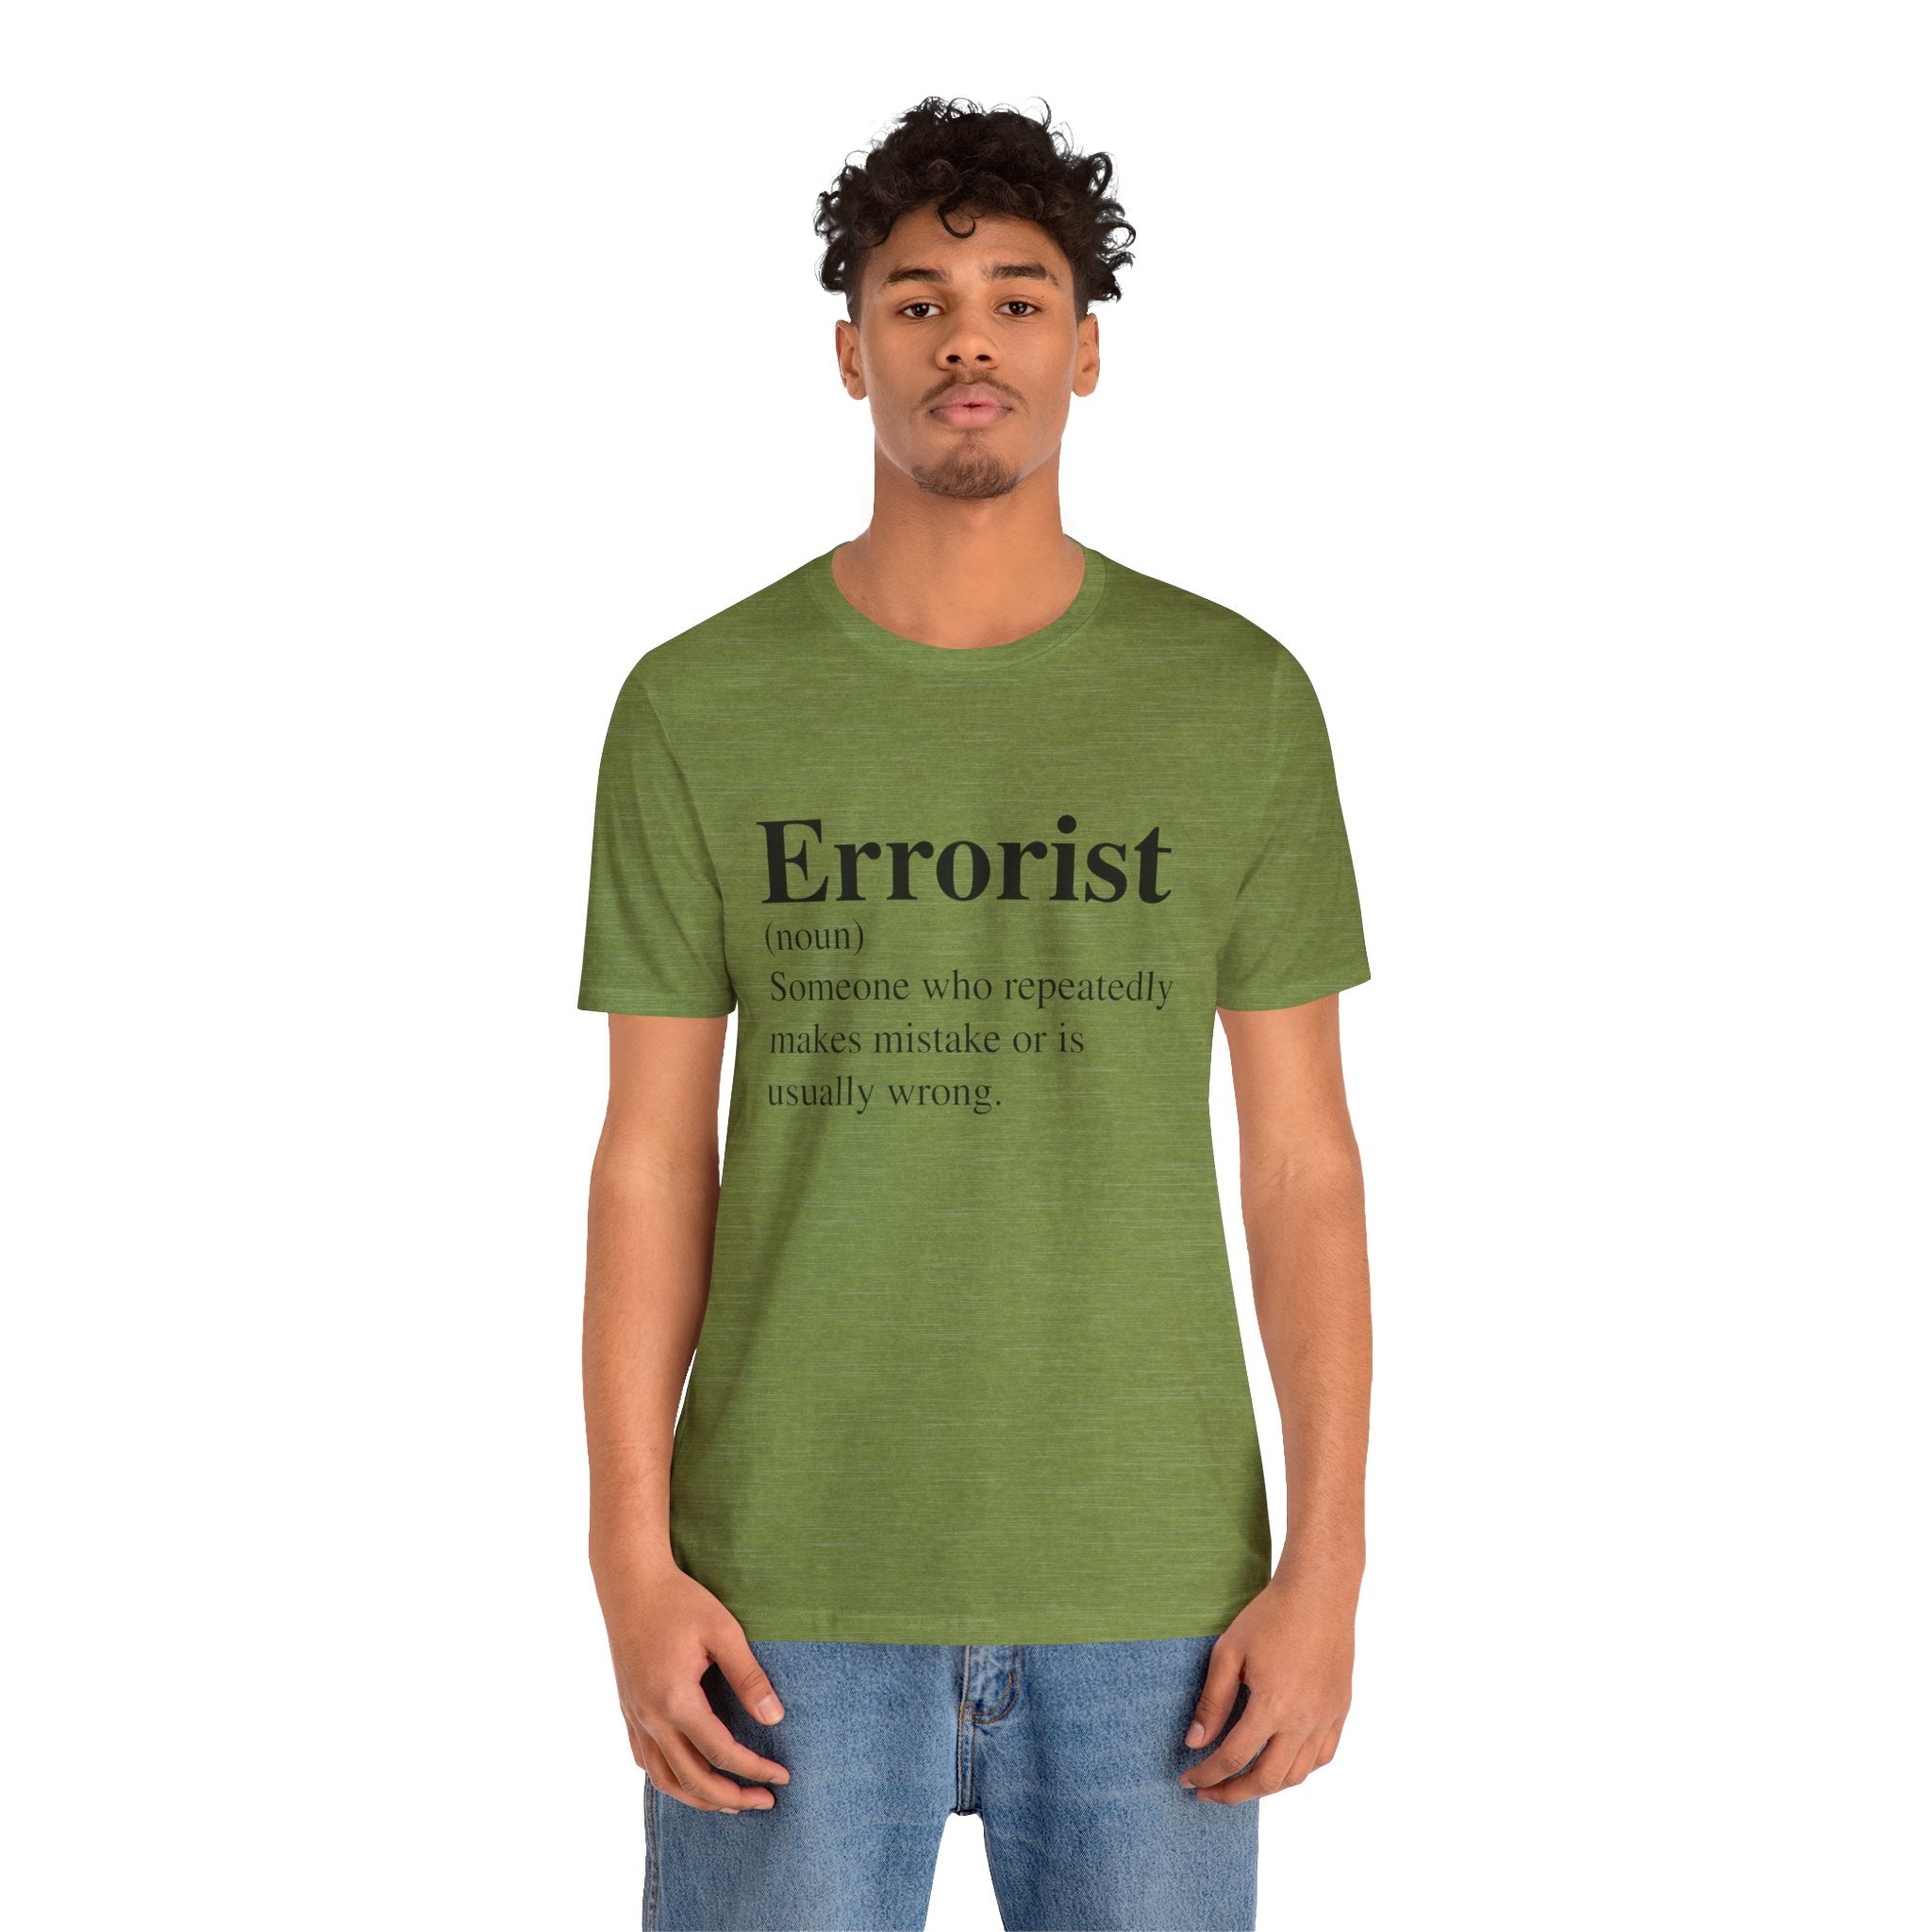 A young man in an Errorist T-Shirt, a soft cotton, unisex tee with the word "Errorist" and its humorous definition printed on the front, standing against a plain background.